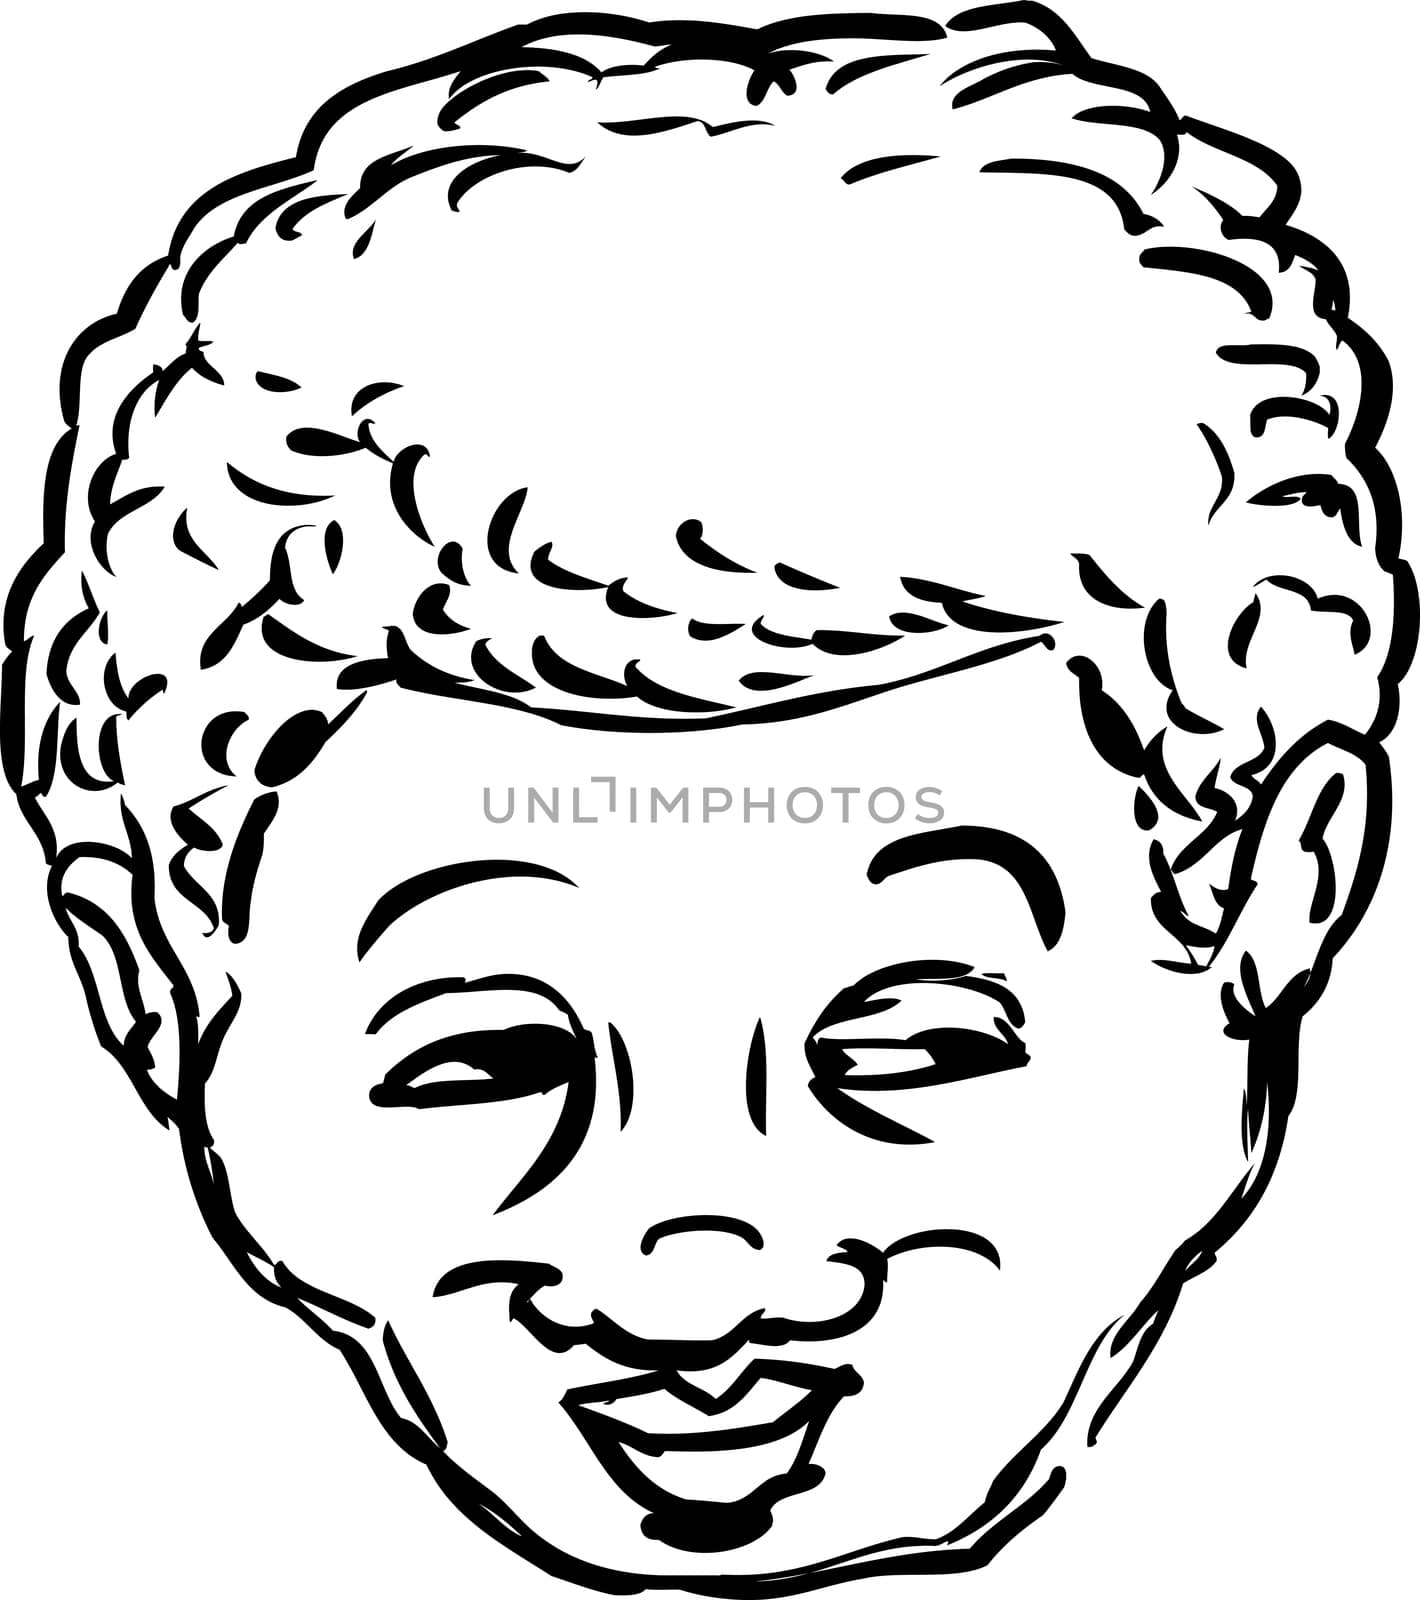 Outlined single isolated head of grinning middle aged Black man looking over